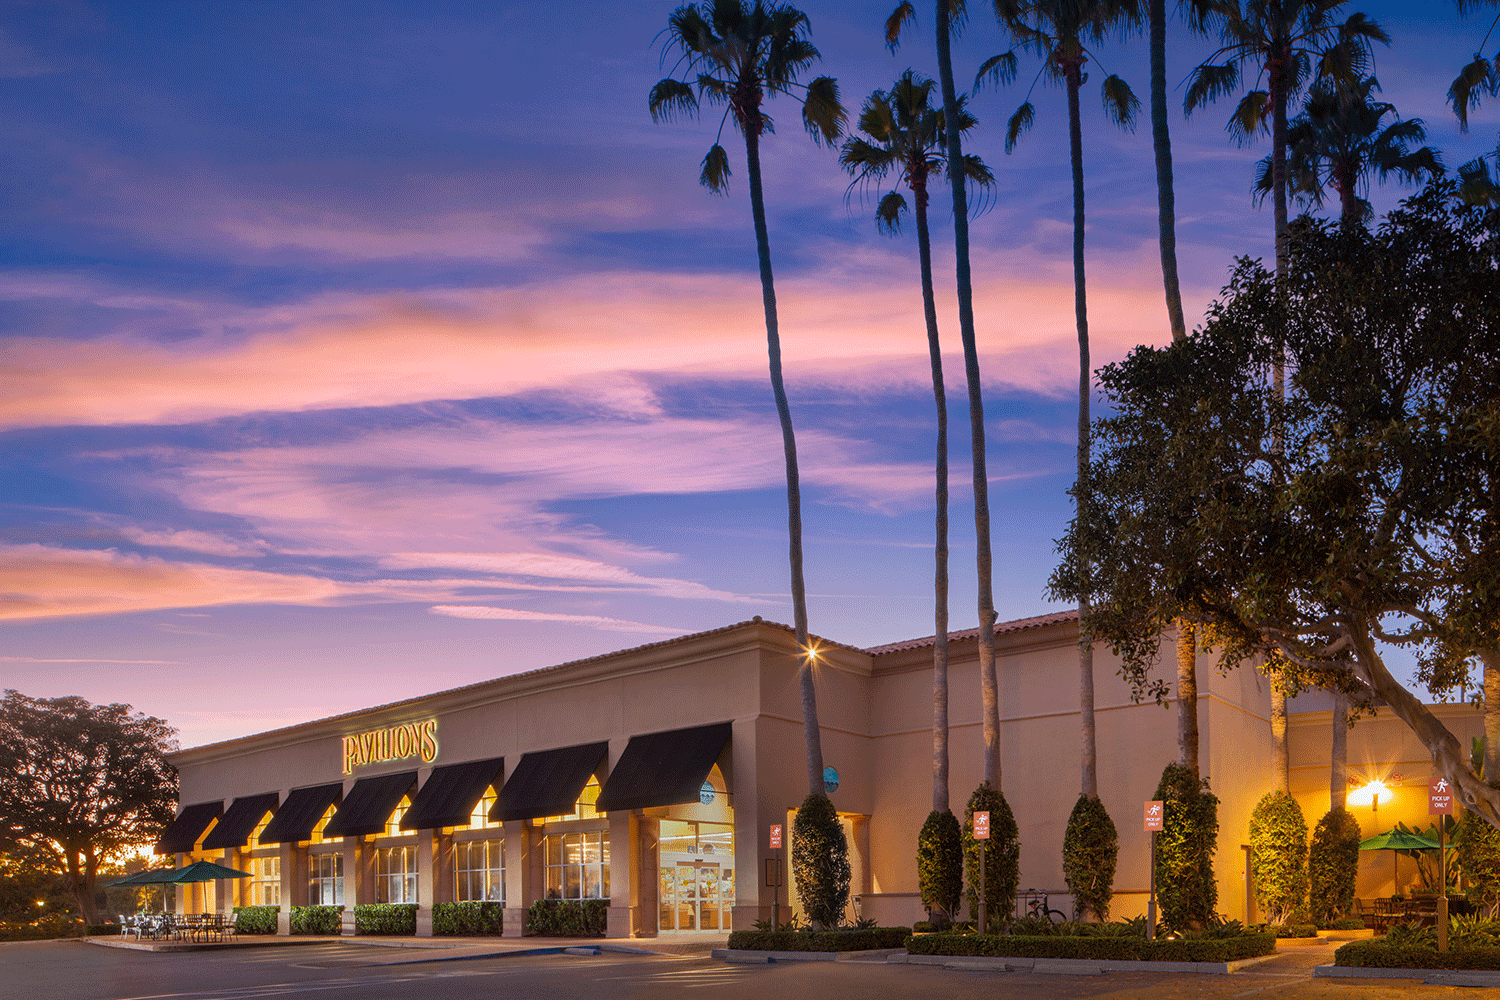  Sunset view of Bayside Shopping Center